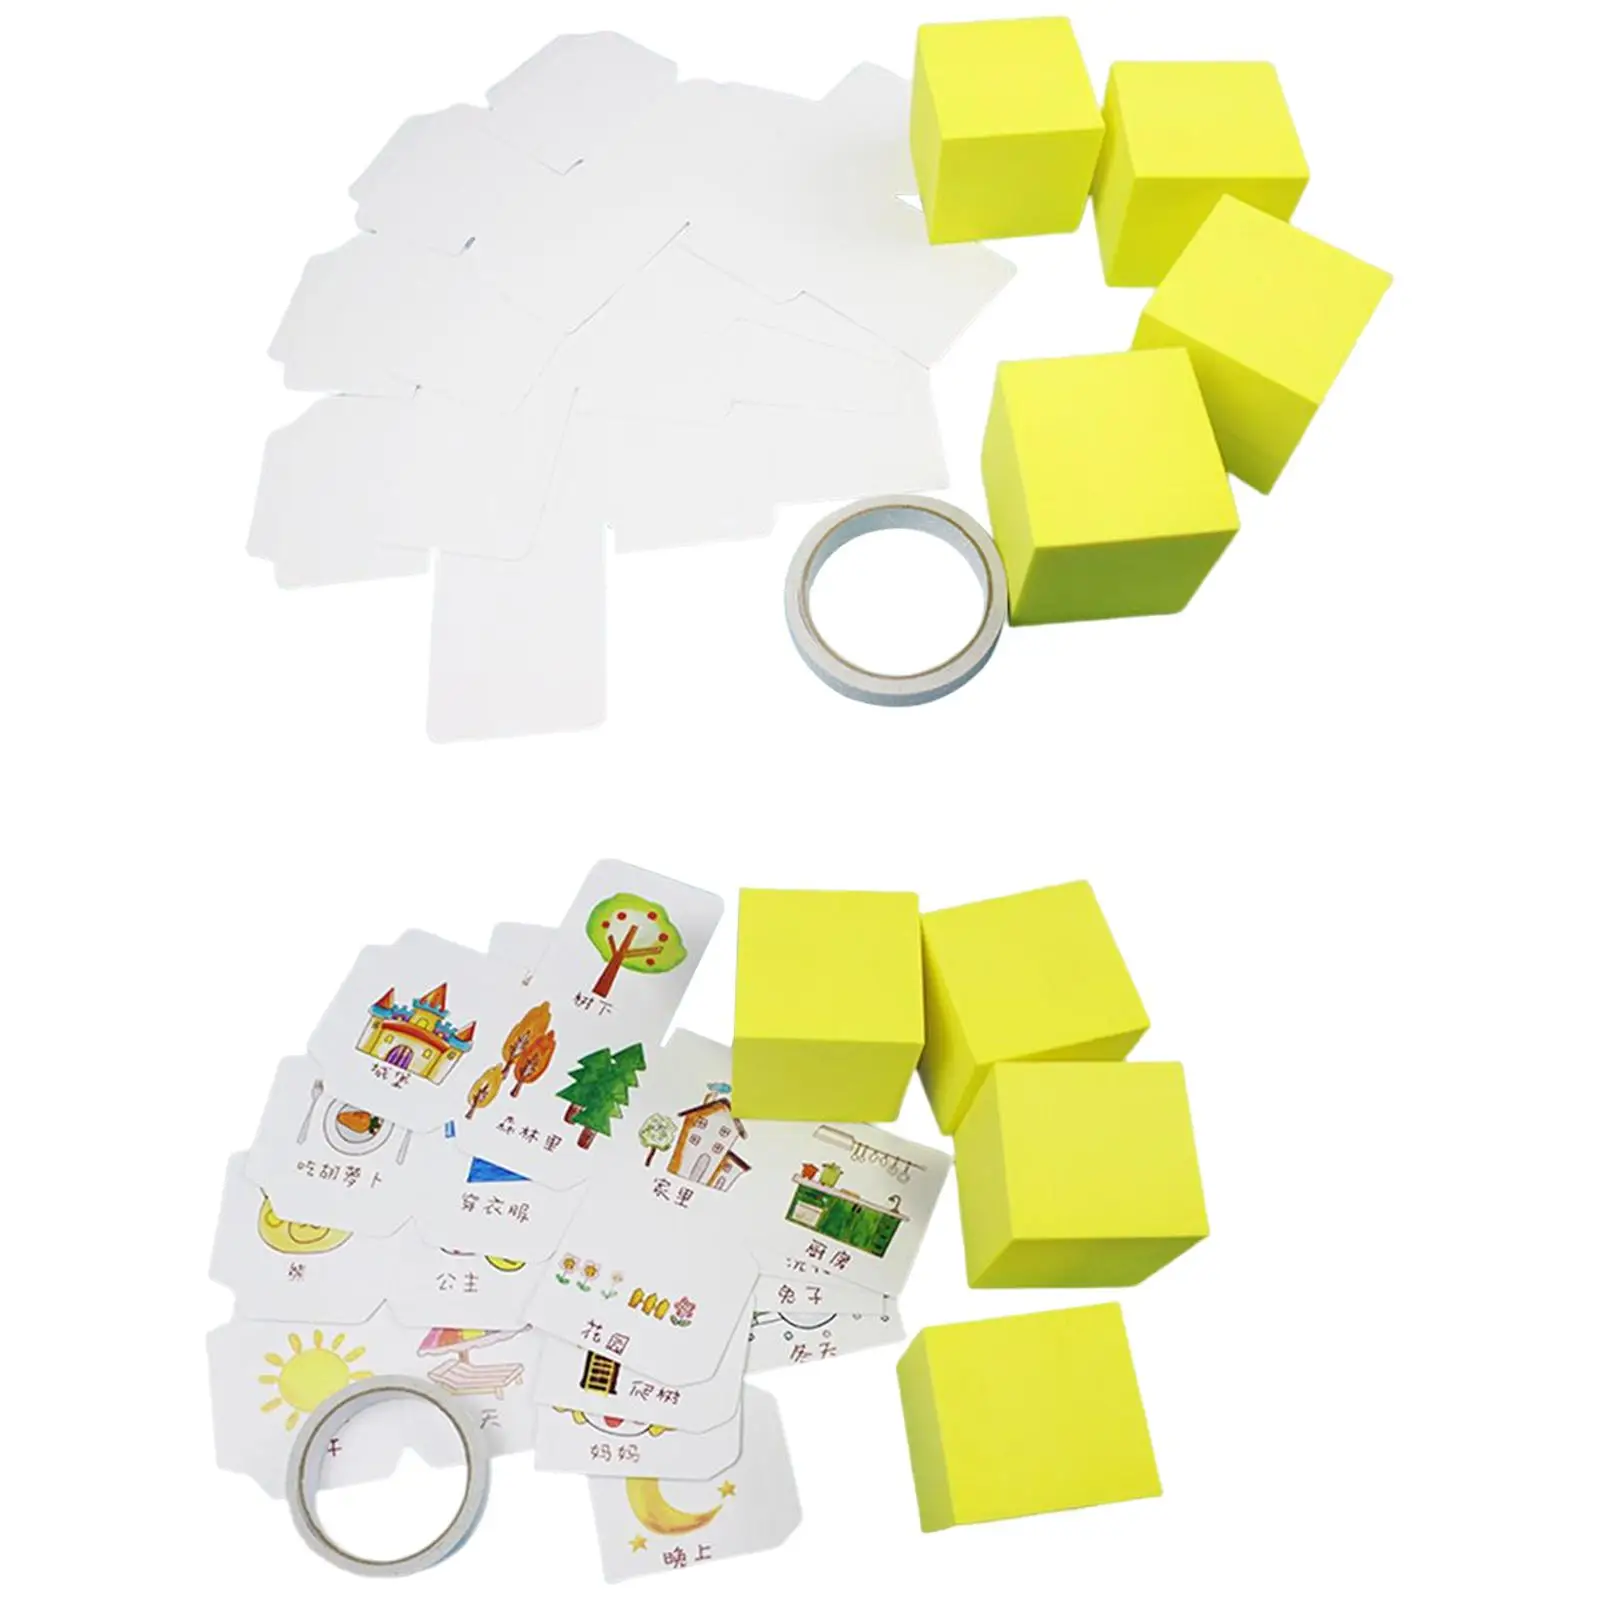 Square 6 Sided Blank Dice with 4 Flash Card Foam Dice for Preschool Ages 3+